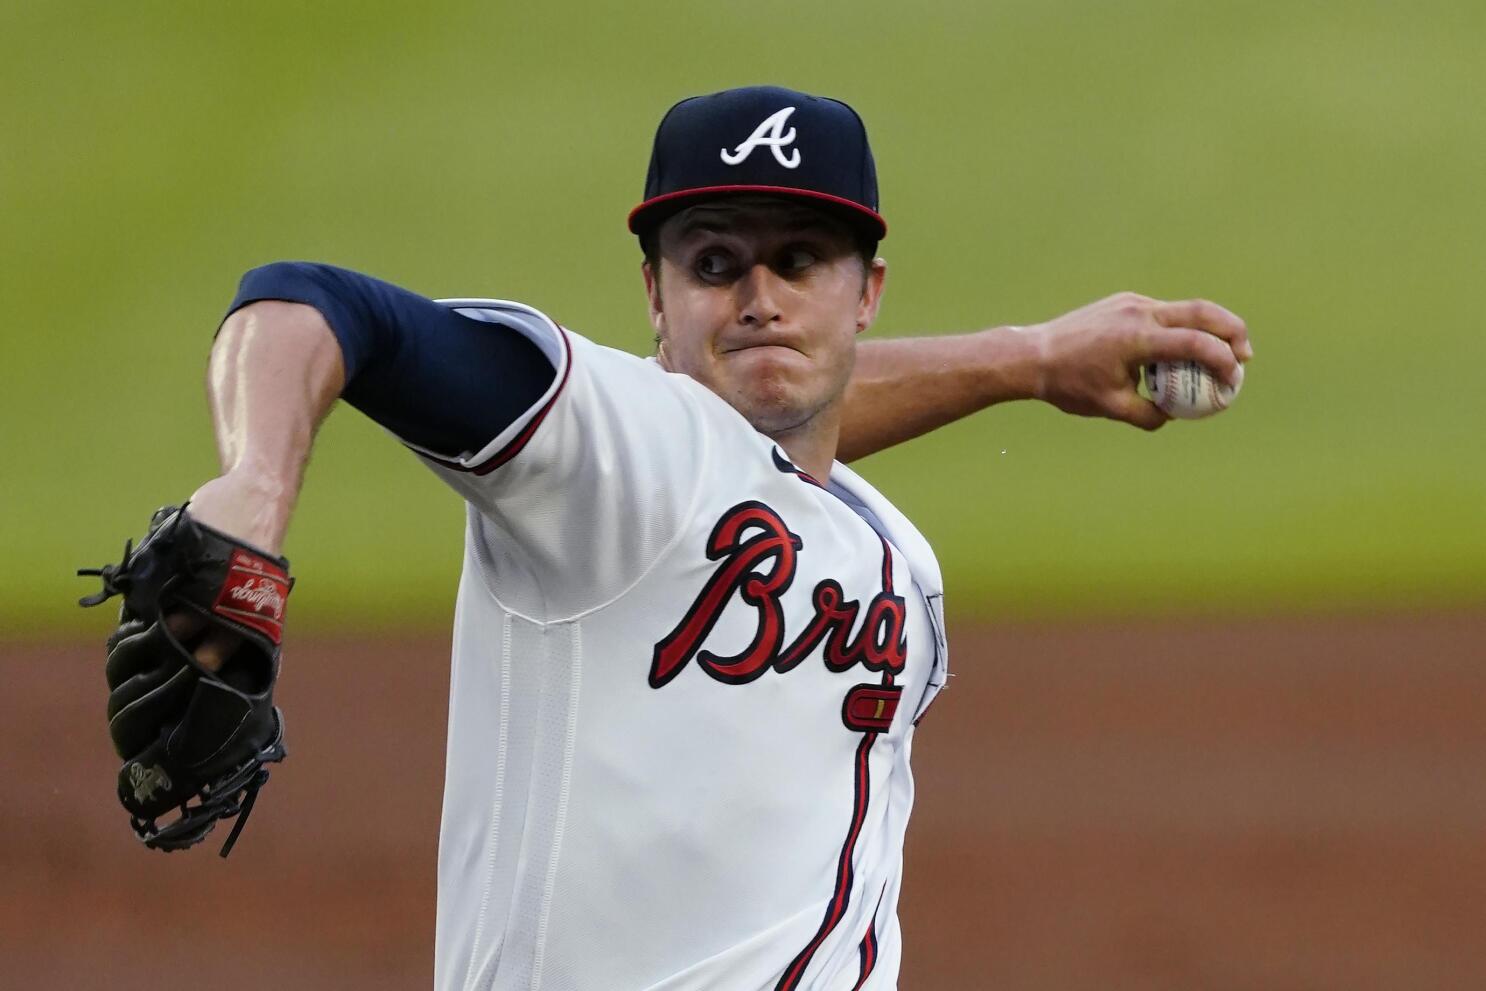 Spring Training stats review: Which Braves pitchers stood out